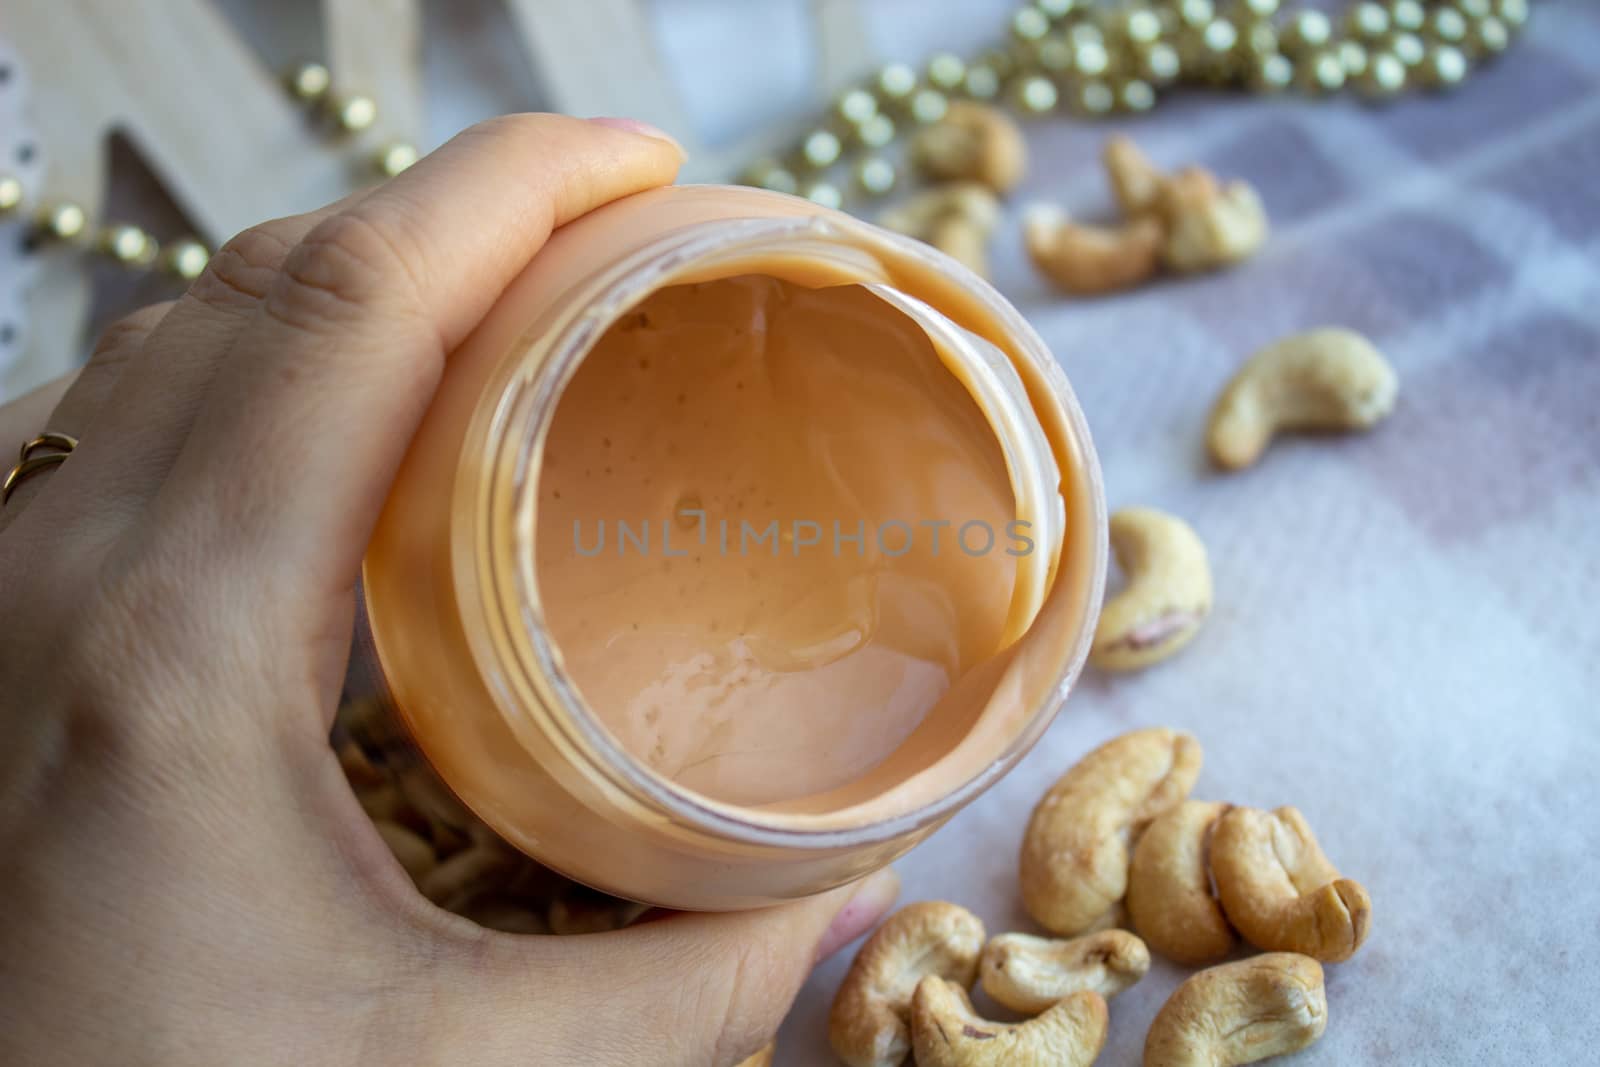 Creamy peanut butter and spoon on background by AnatoliiFoto